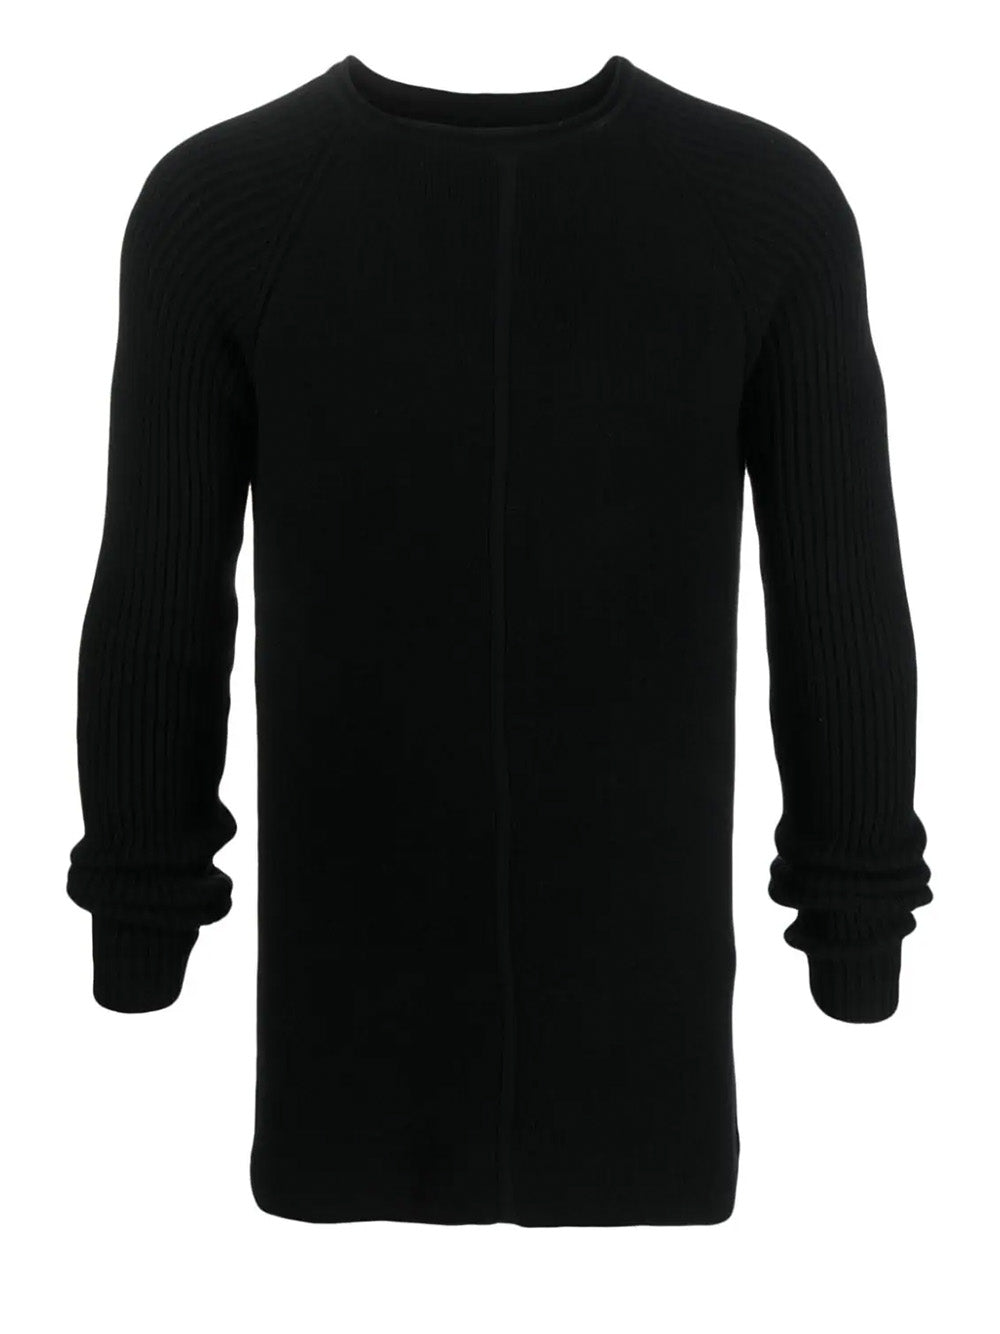     Rick-Owens-Pullover-Recycled-Cashmere-Black-1